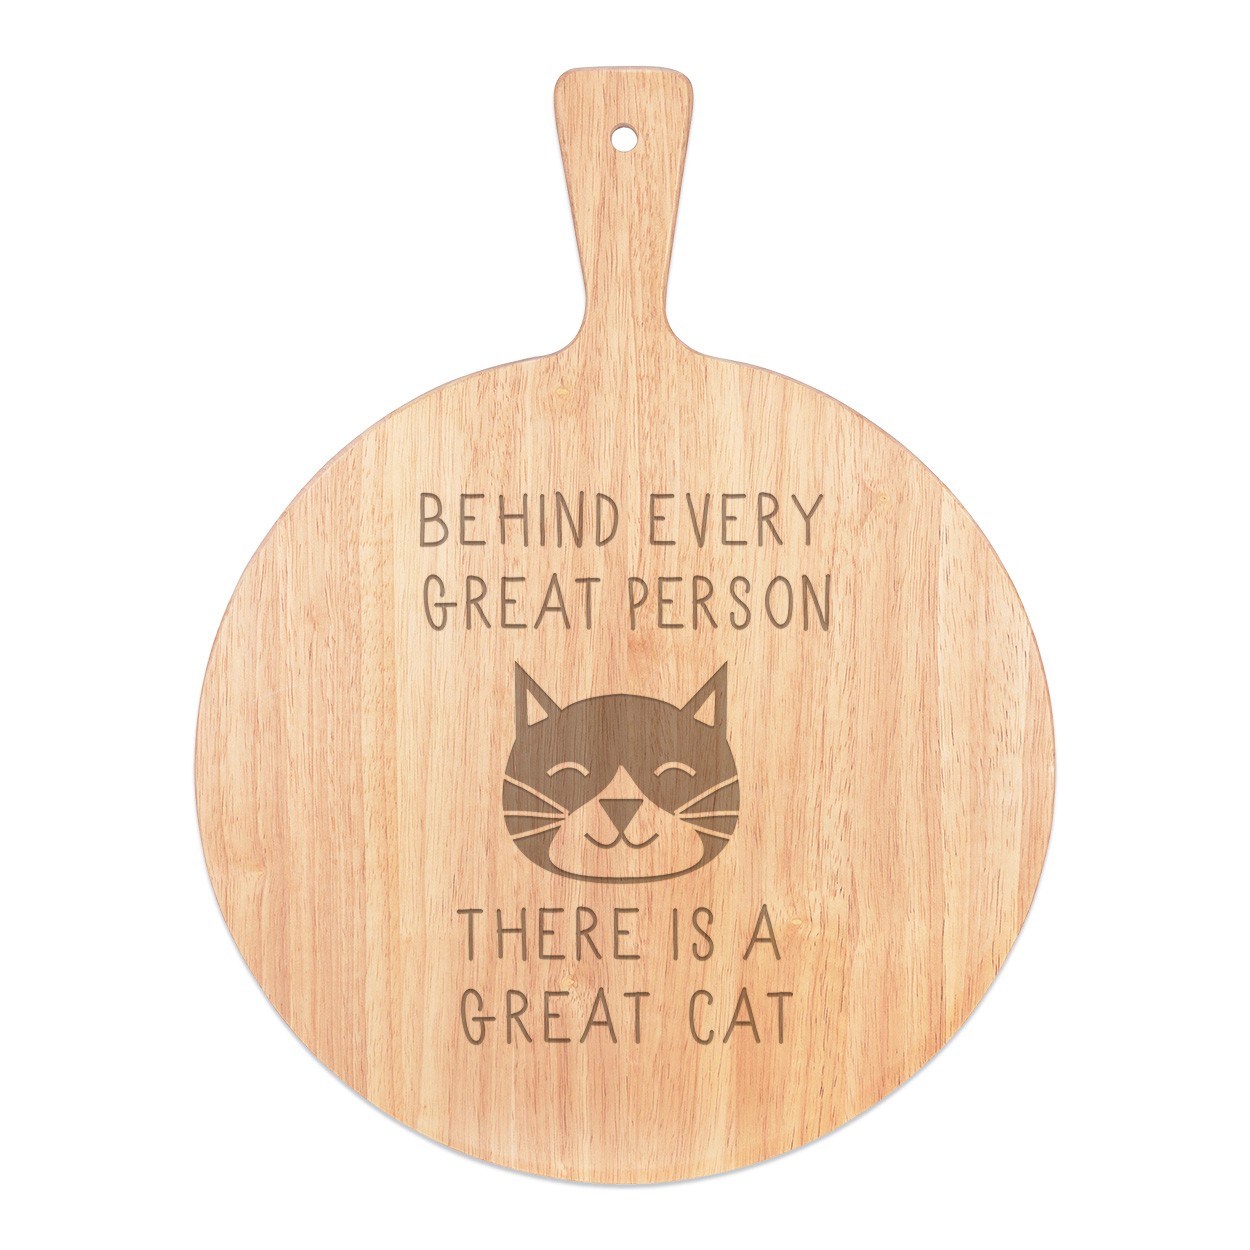 Behind Every Great Person Is A Great Cat Pizza Board Paddle Serving Tray Handle Round Wooden 45x34cm